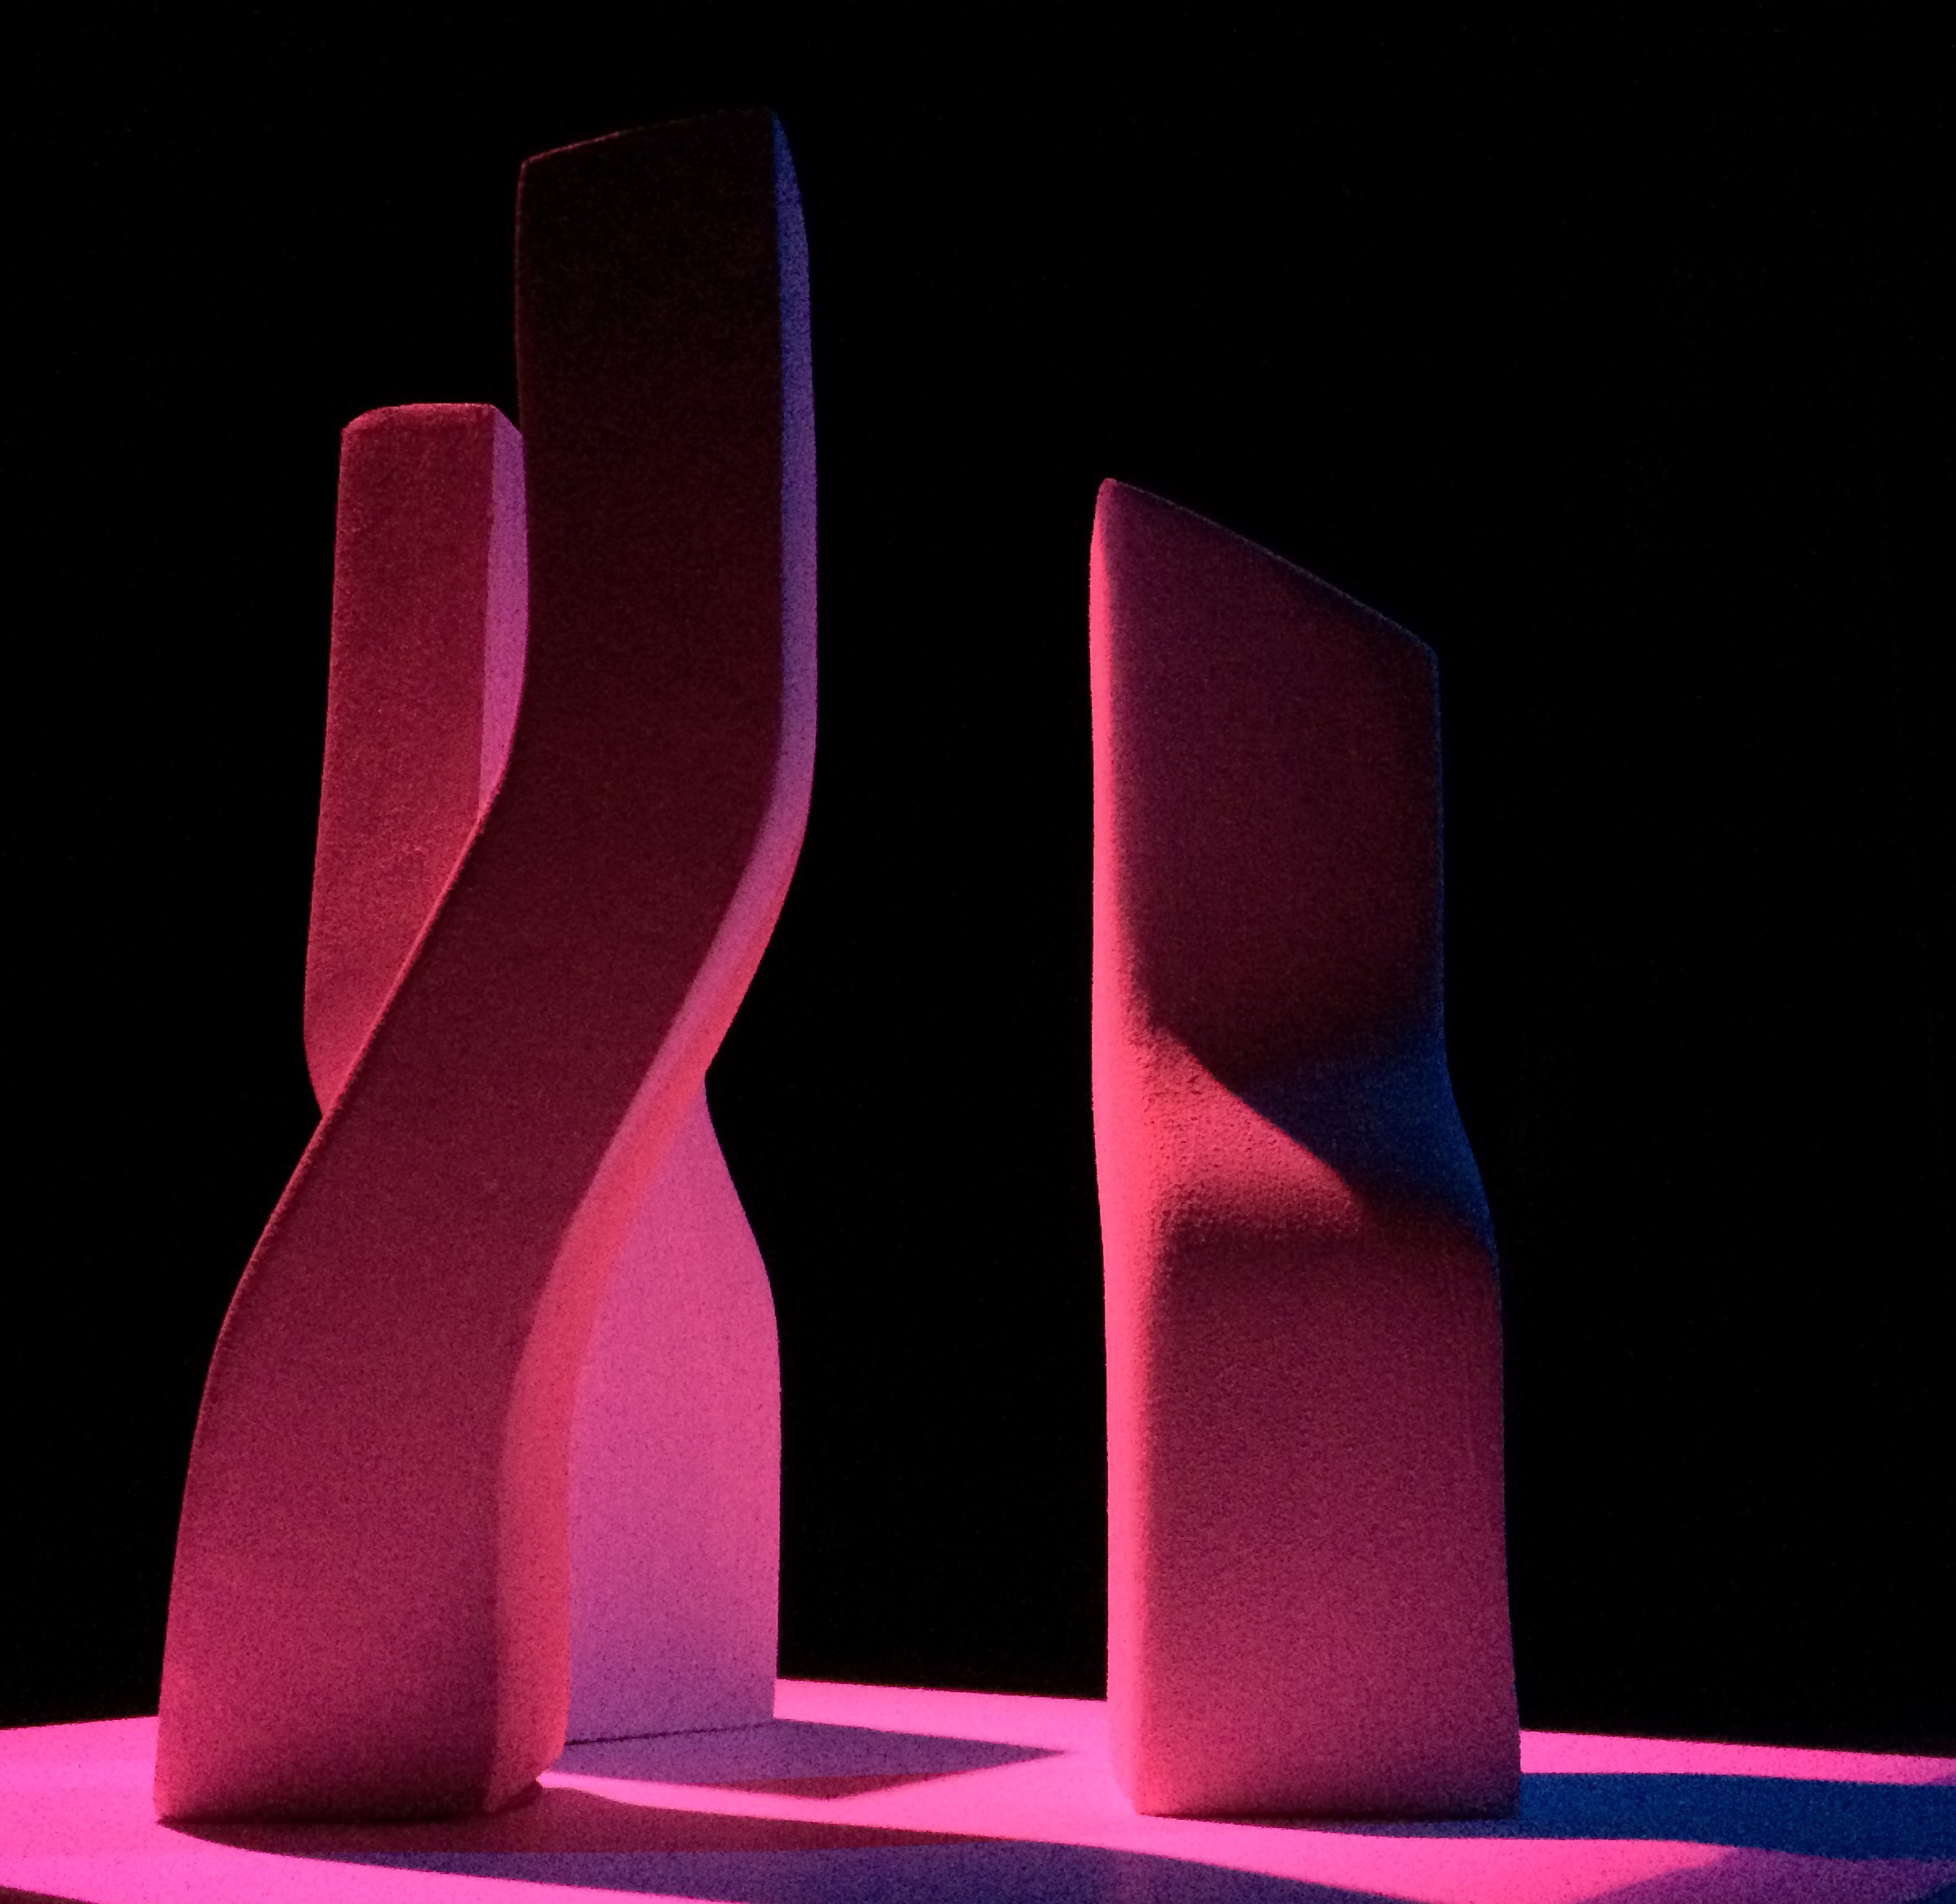  Collaborative project with an industrial design student drawing inspiration from Zaha Hadid for the form and shape of the models with lighting inspired by the immersive installation works of Olafur Eliasson. 